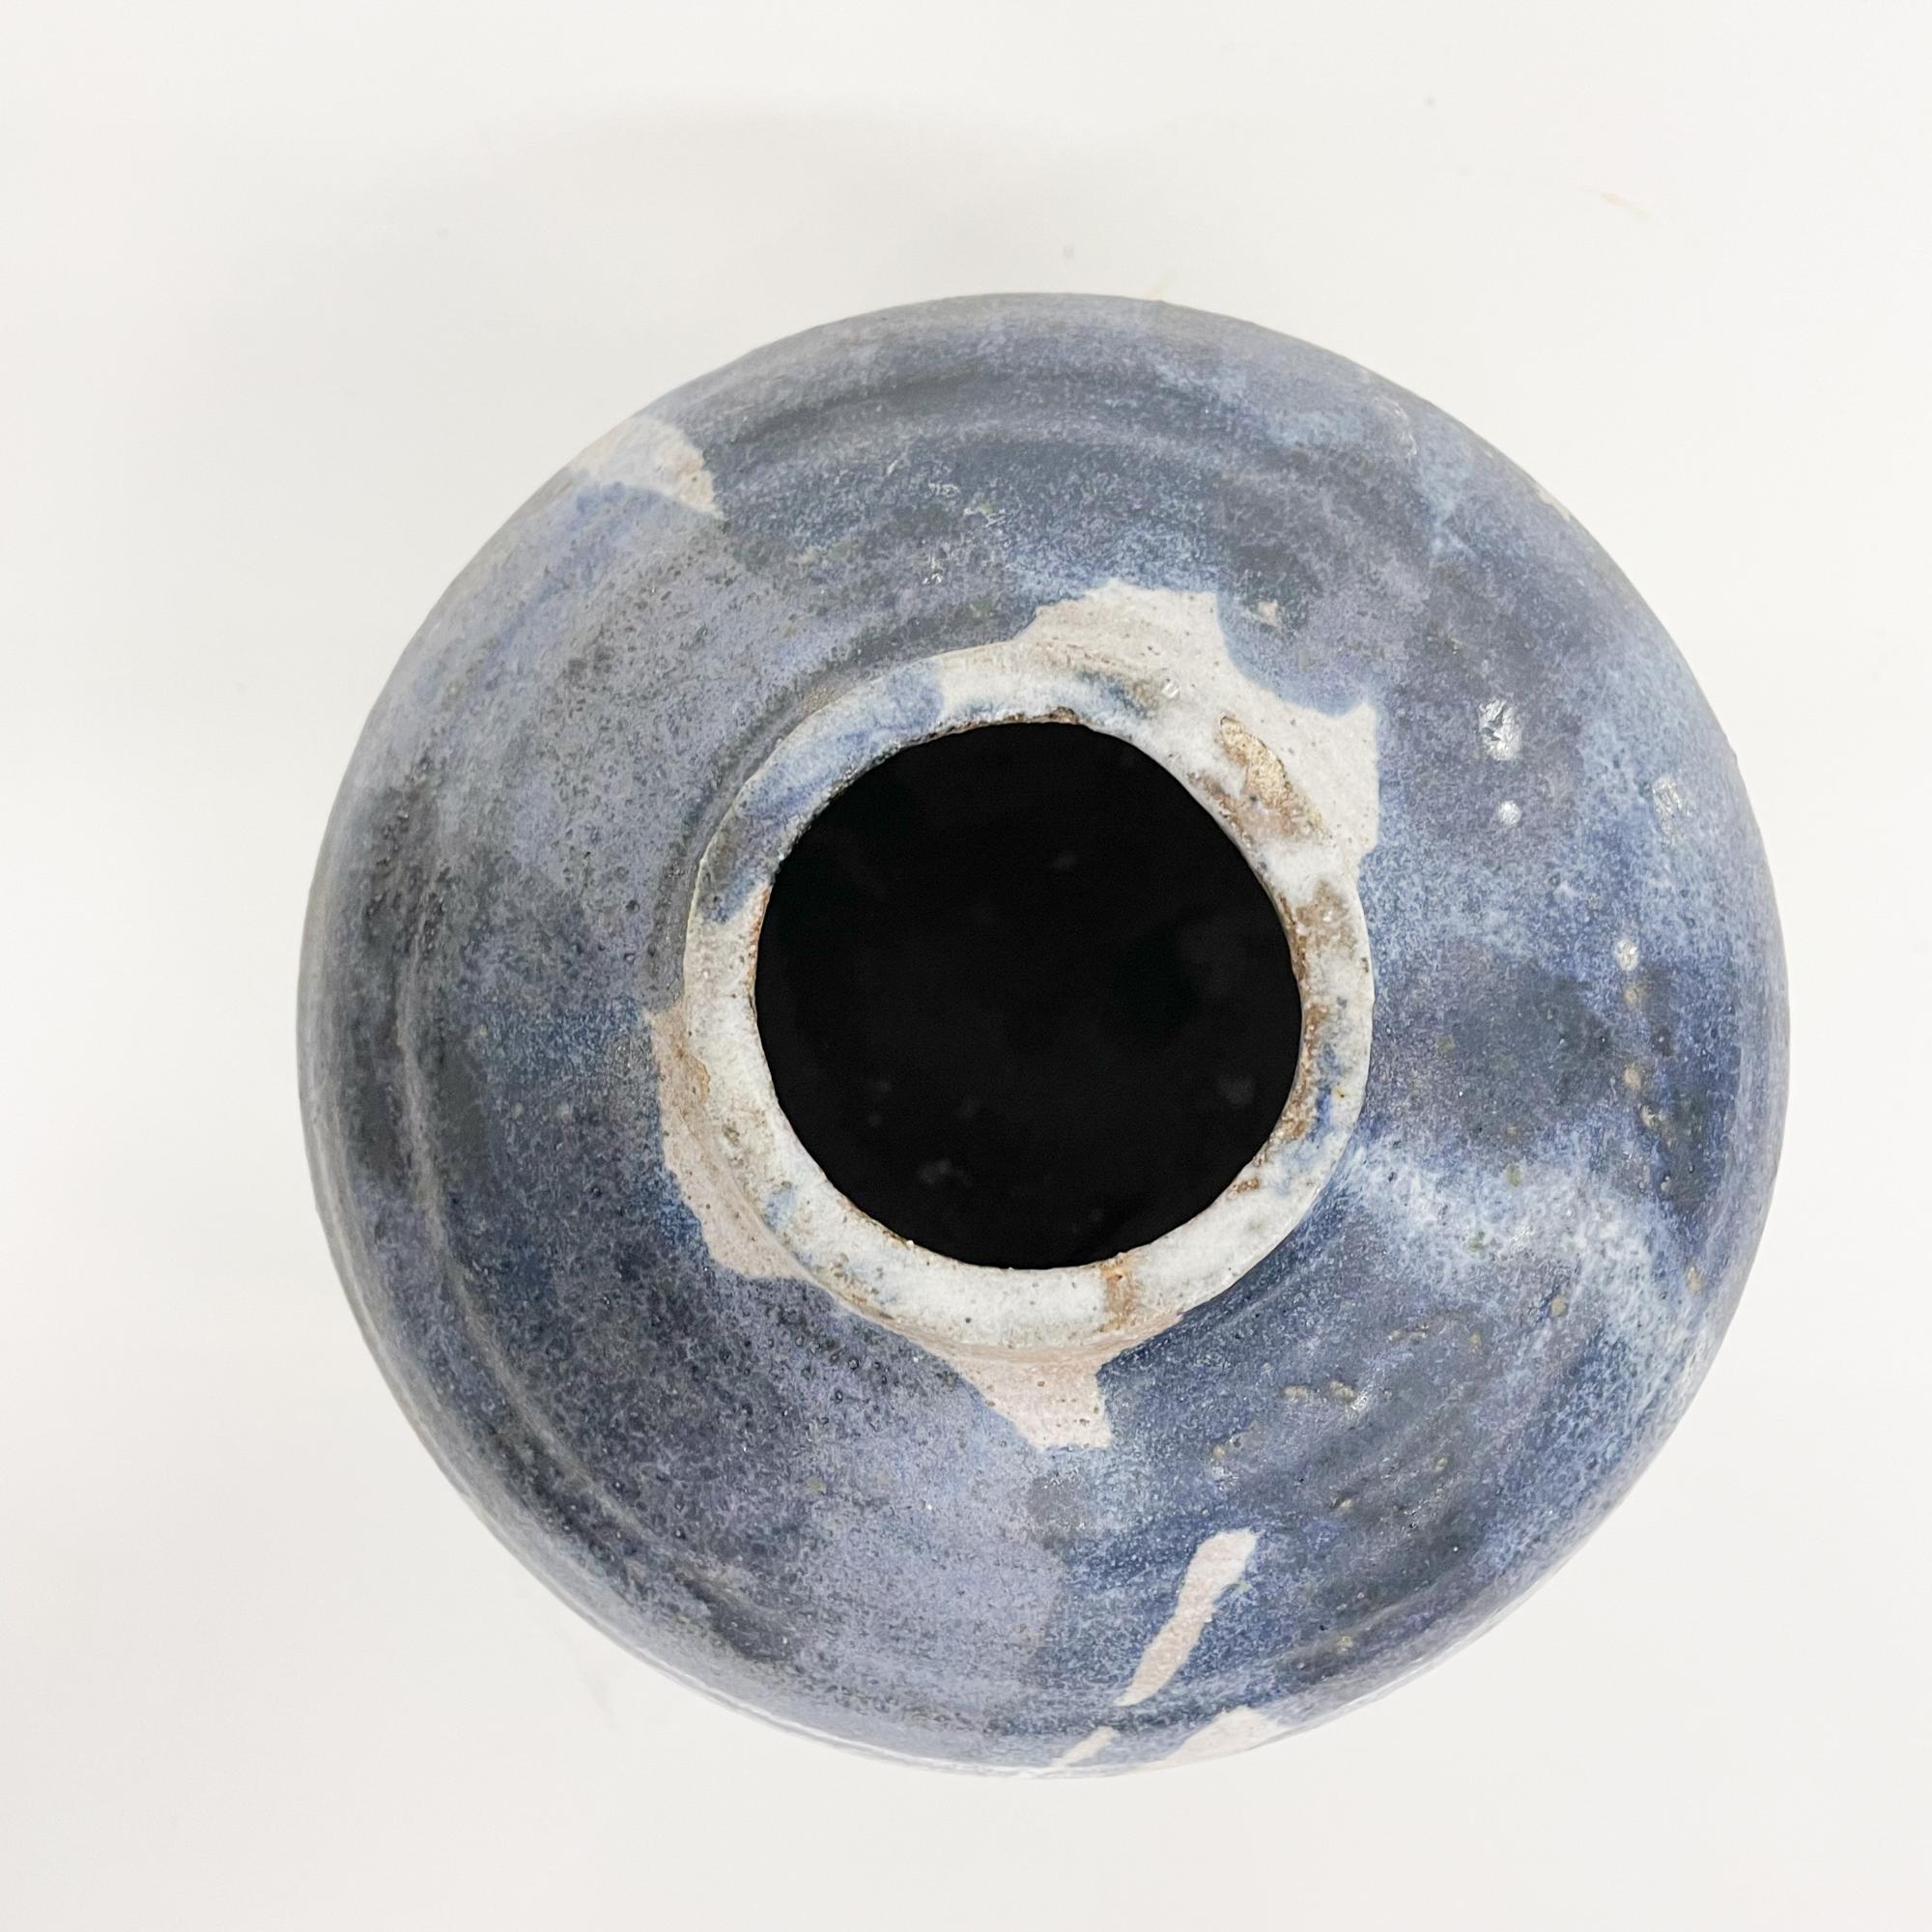 Late 20th Century Round Vase in Swirling Shades of Blue Ceramic Art Pottery Modern Design, 1980s